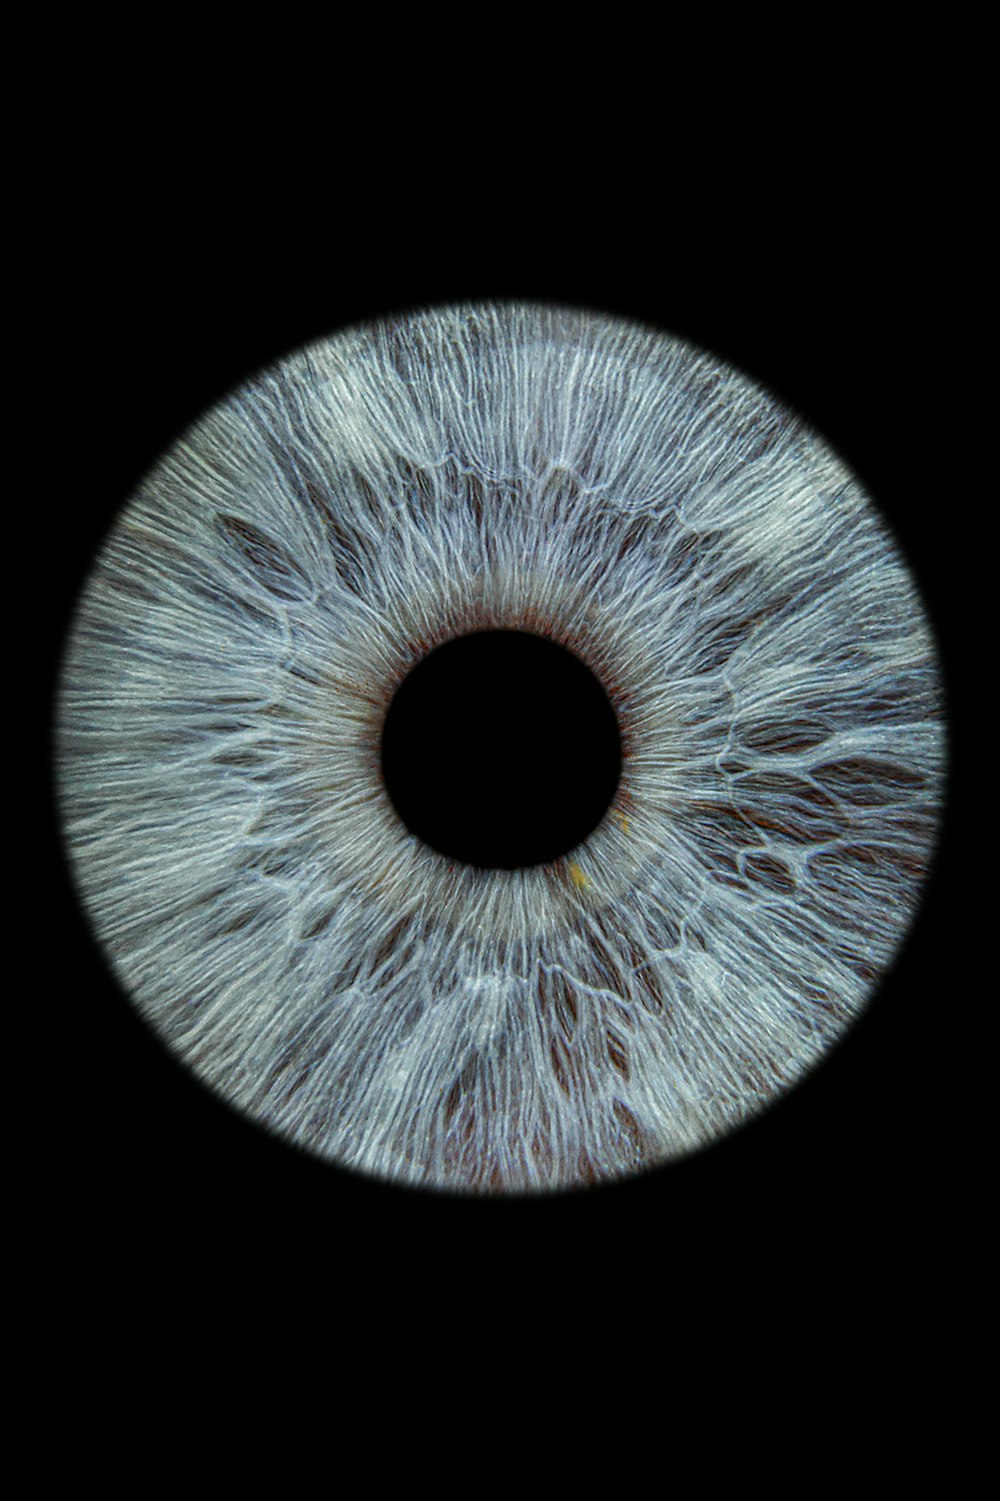 a close up of an eye with a black background